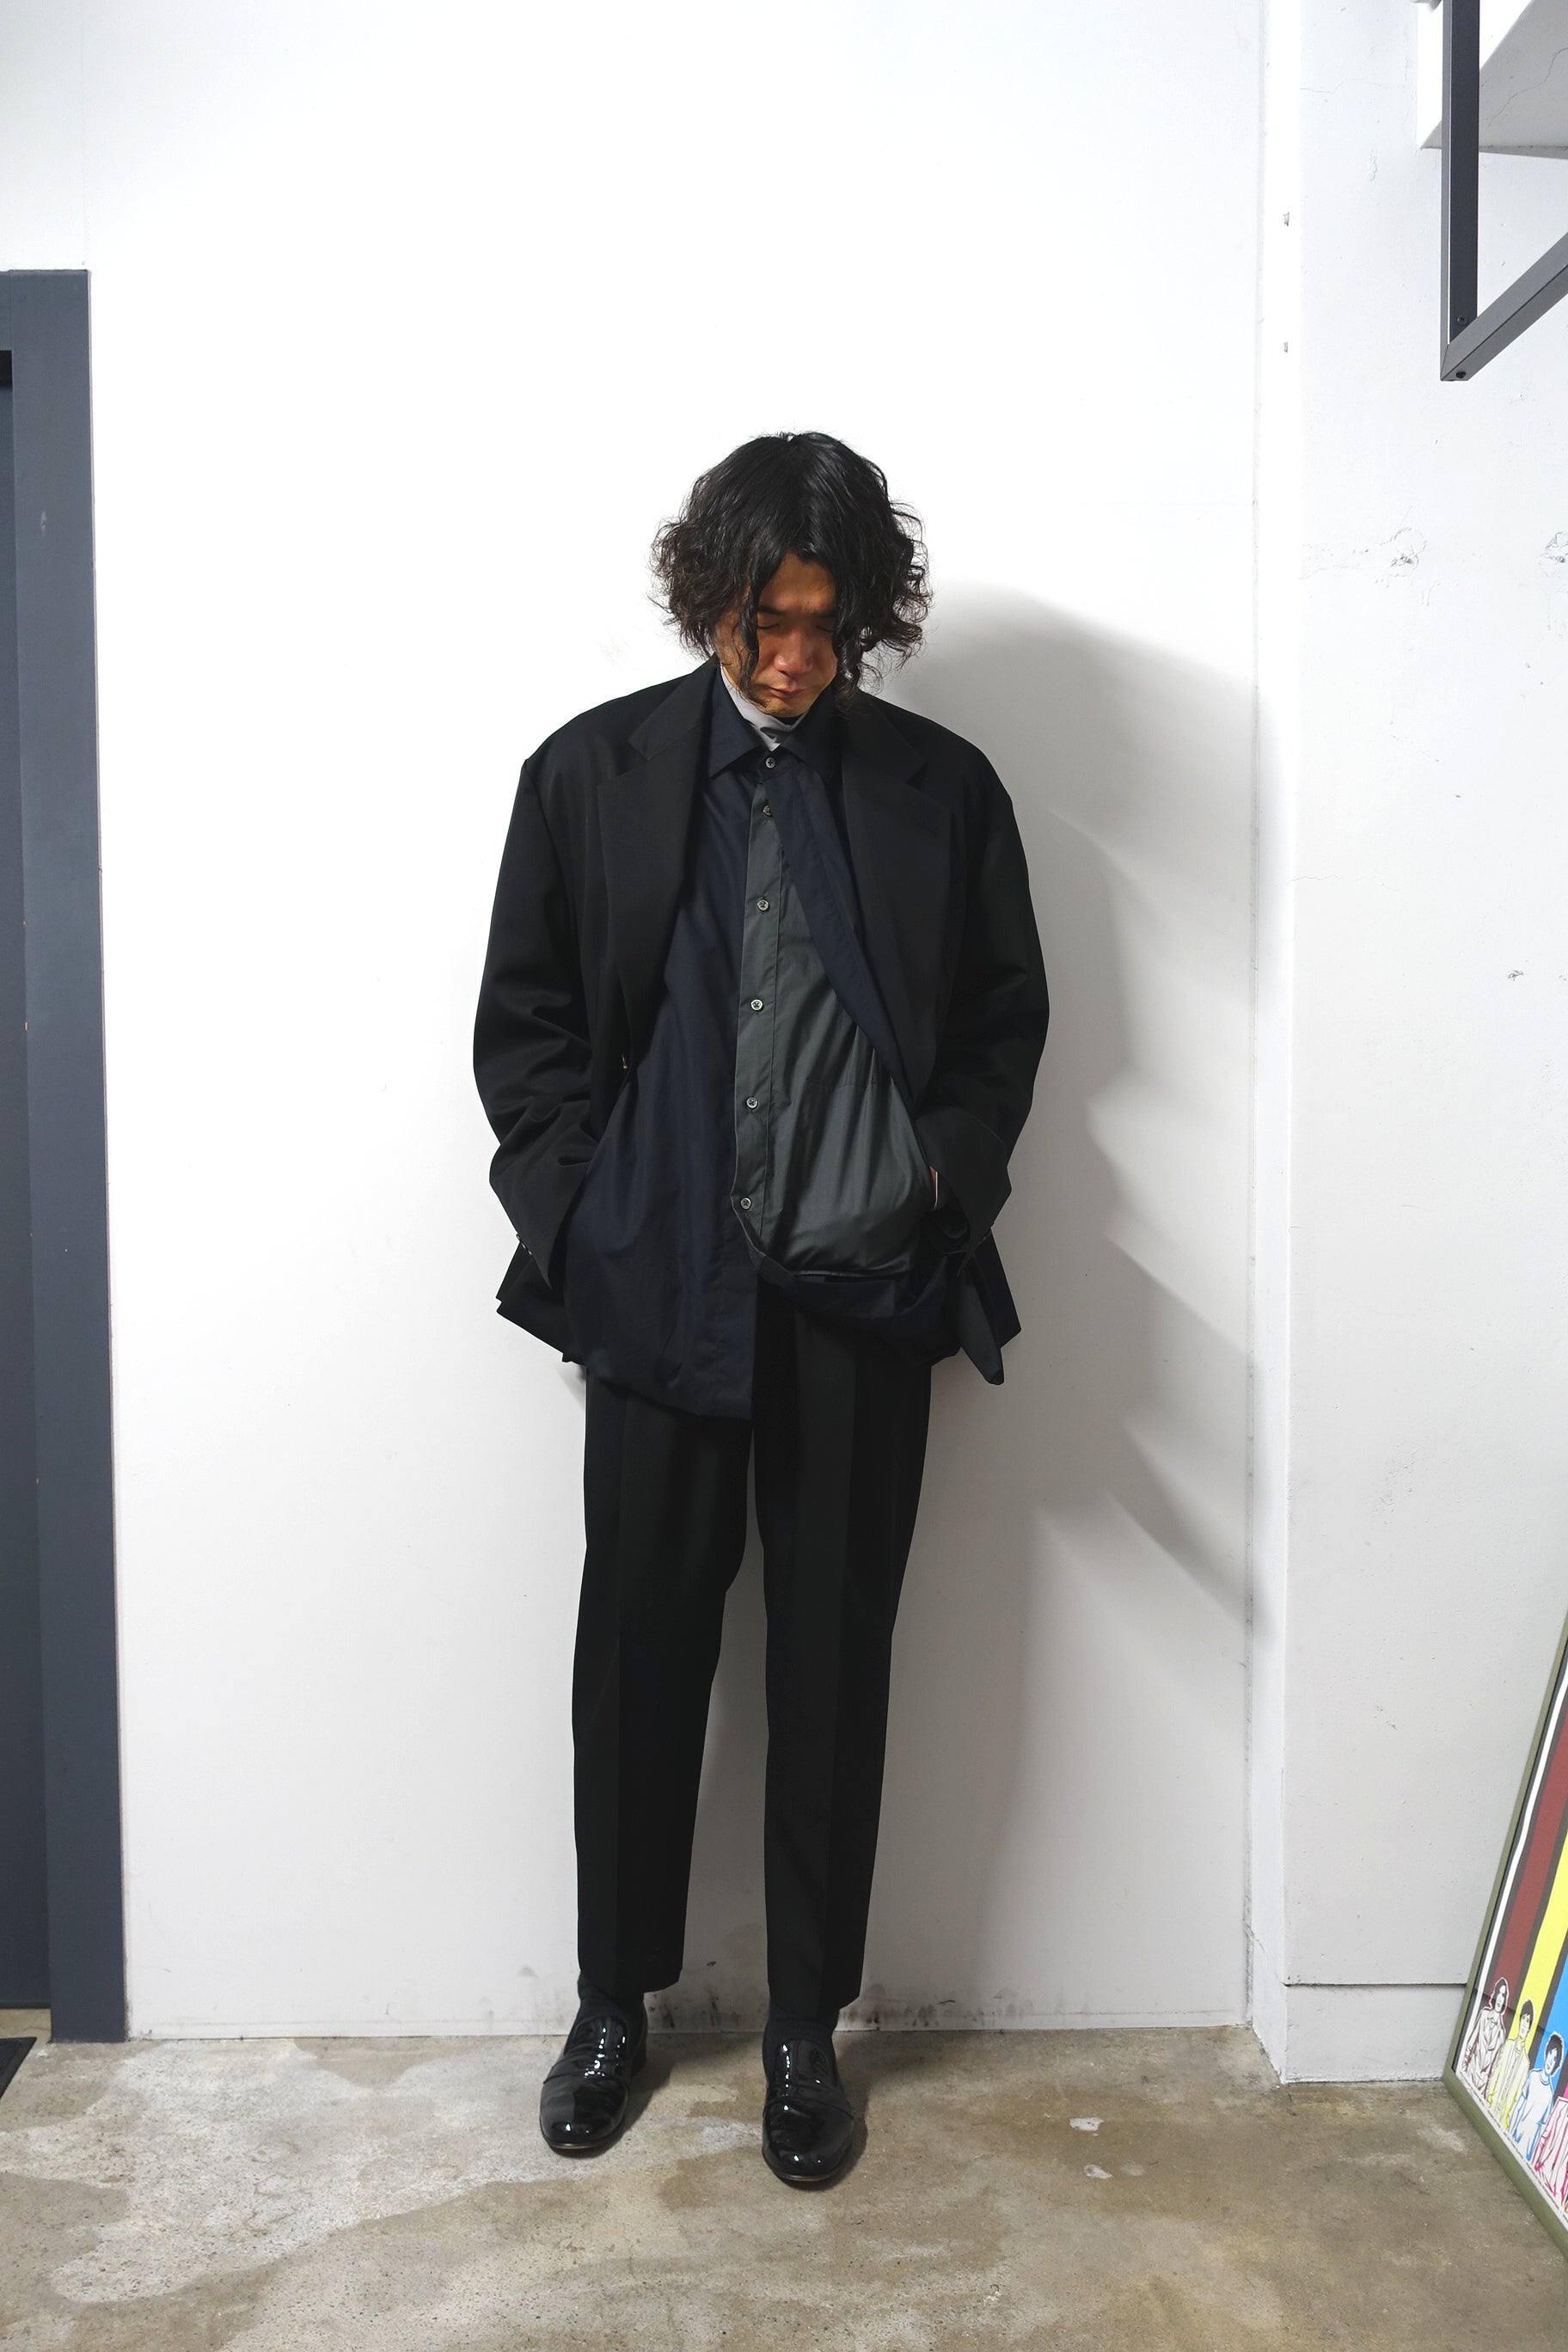 stein(シュタイン)/OVERSIZED SINGLE BREASTED JACKET/Black 通販 取り扱い-CONCRETE RIVER